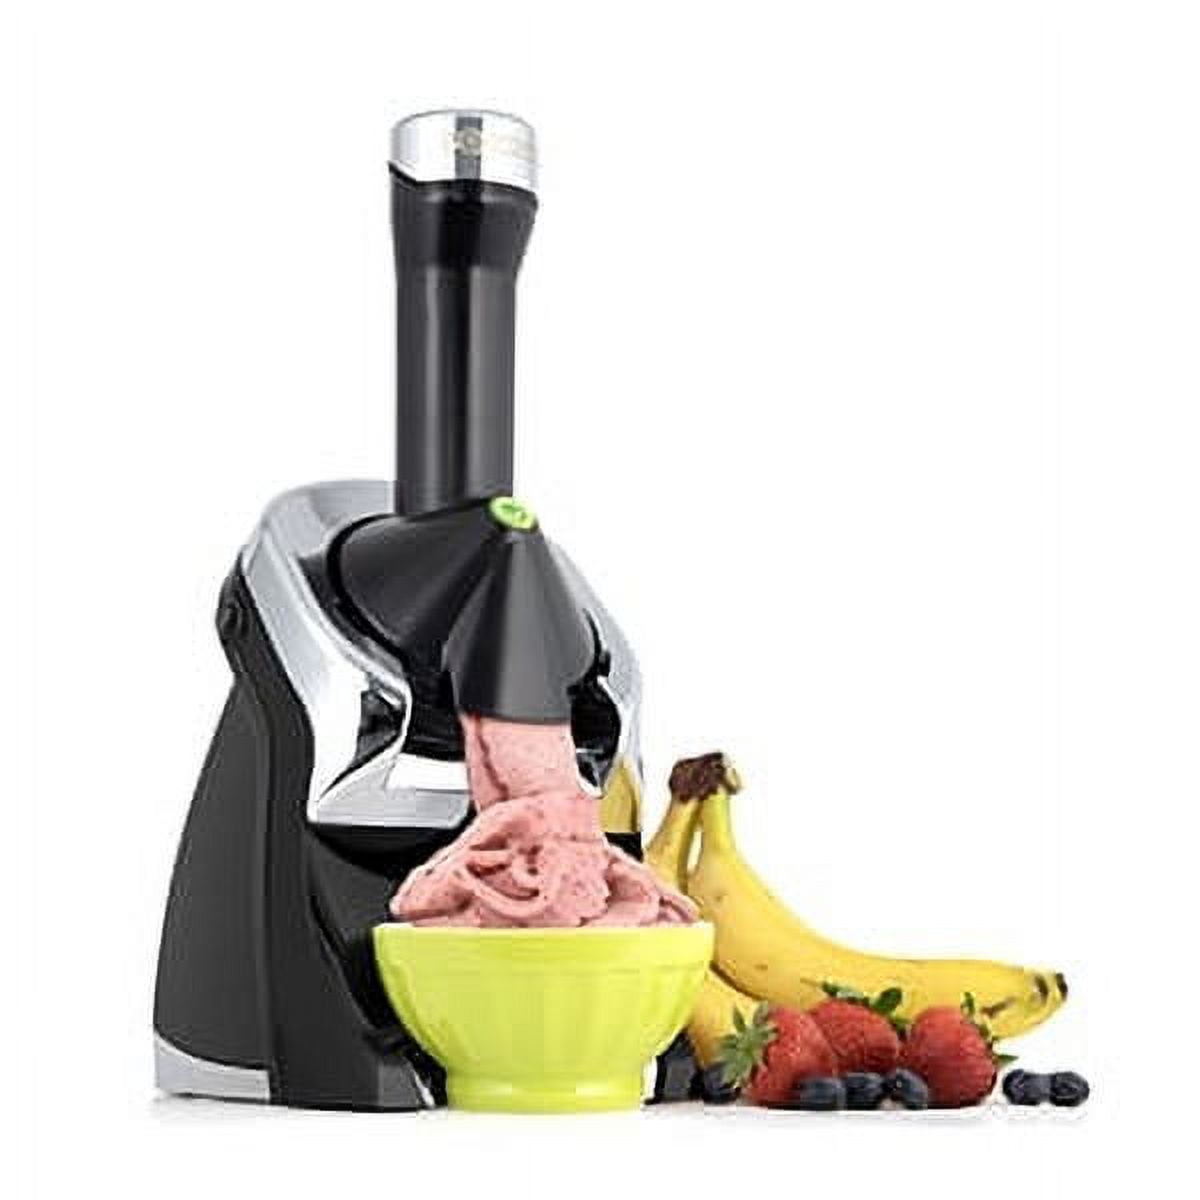 Yonanas 902RD Classic Vegan, Dairy-Free Frozen Fruit Soft Serve Maker,  Includes 36 Recipes, 200-Watts, Red